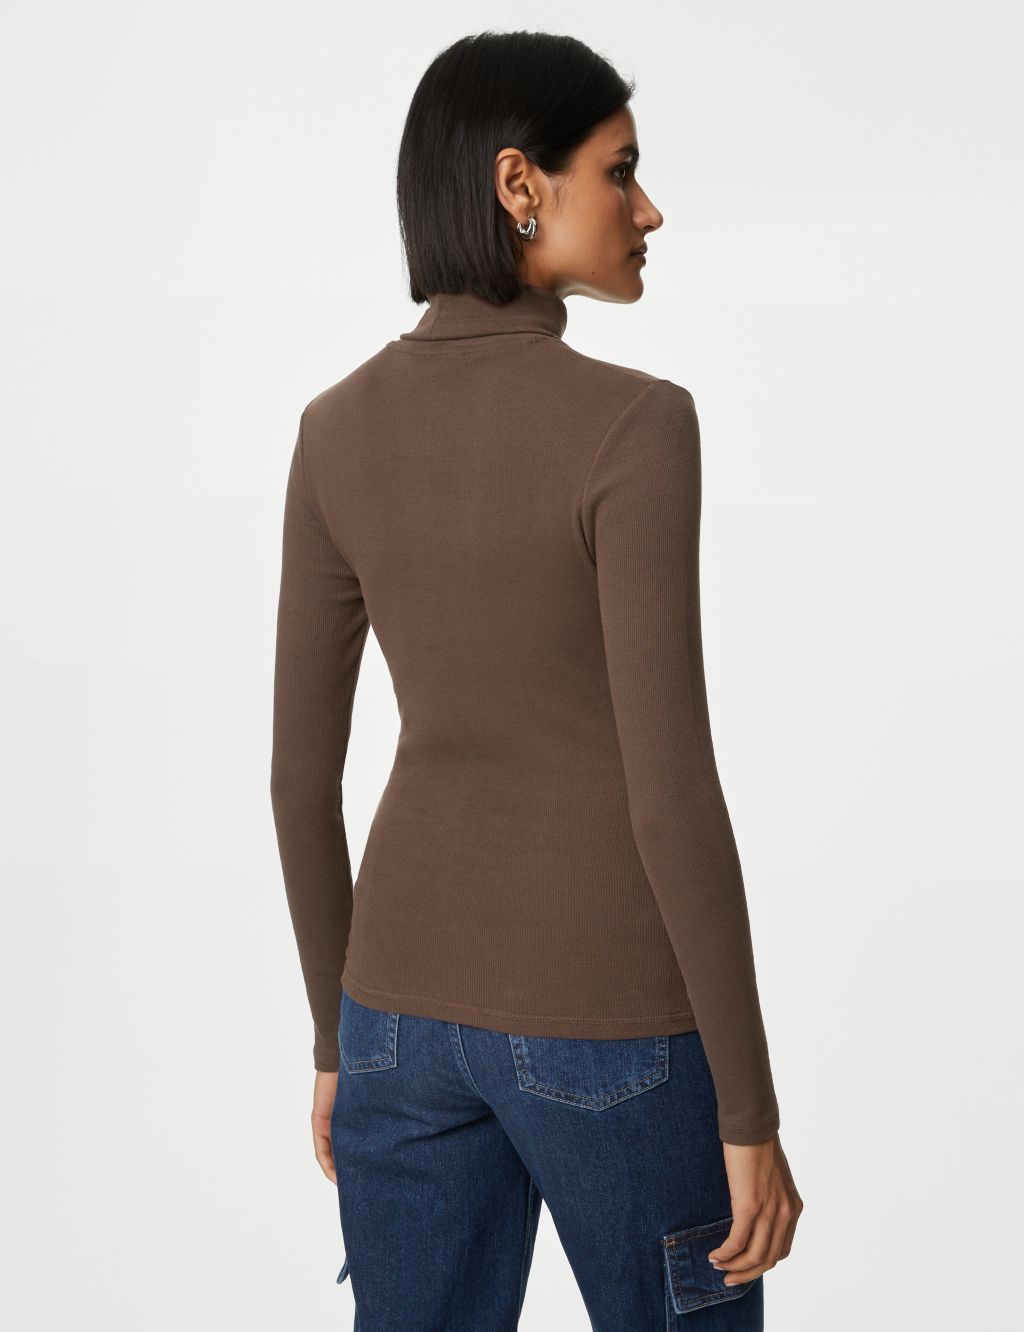 Cotton Rich Ribbed Top image 5